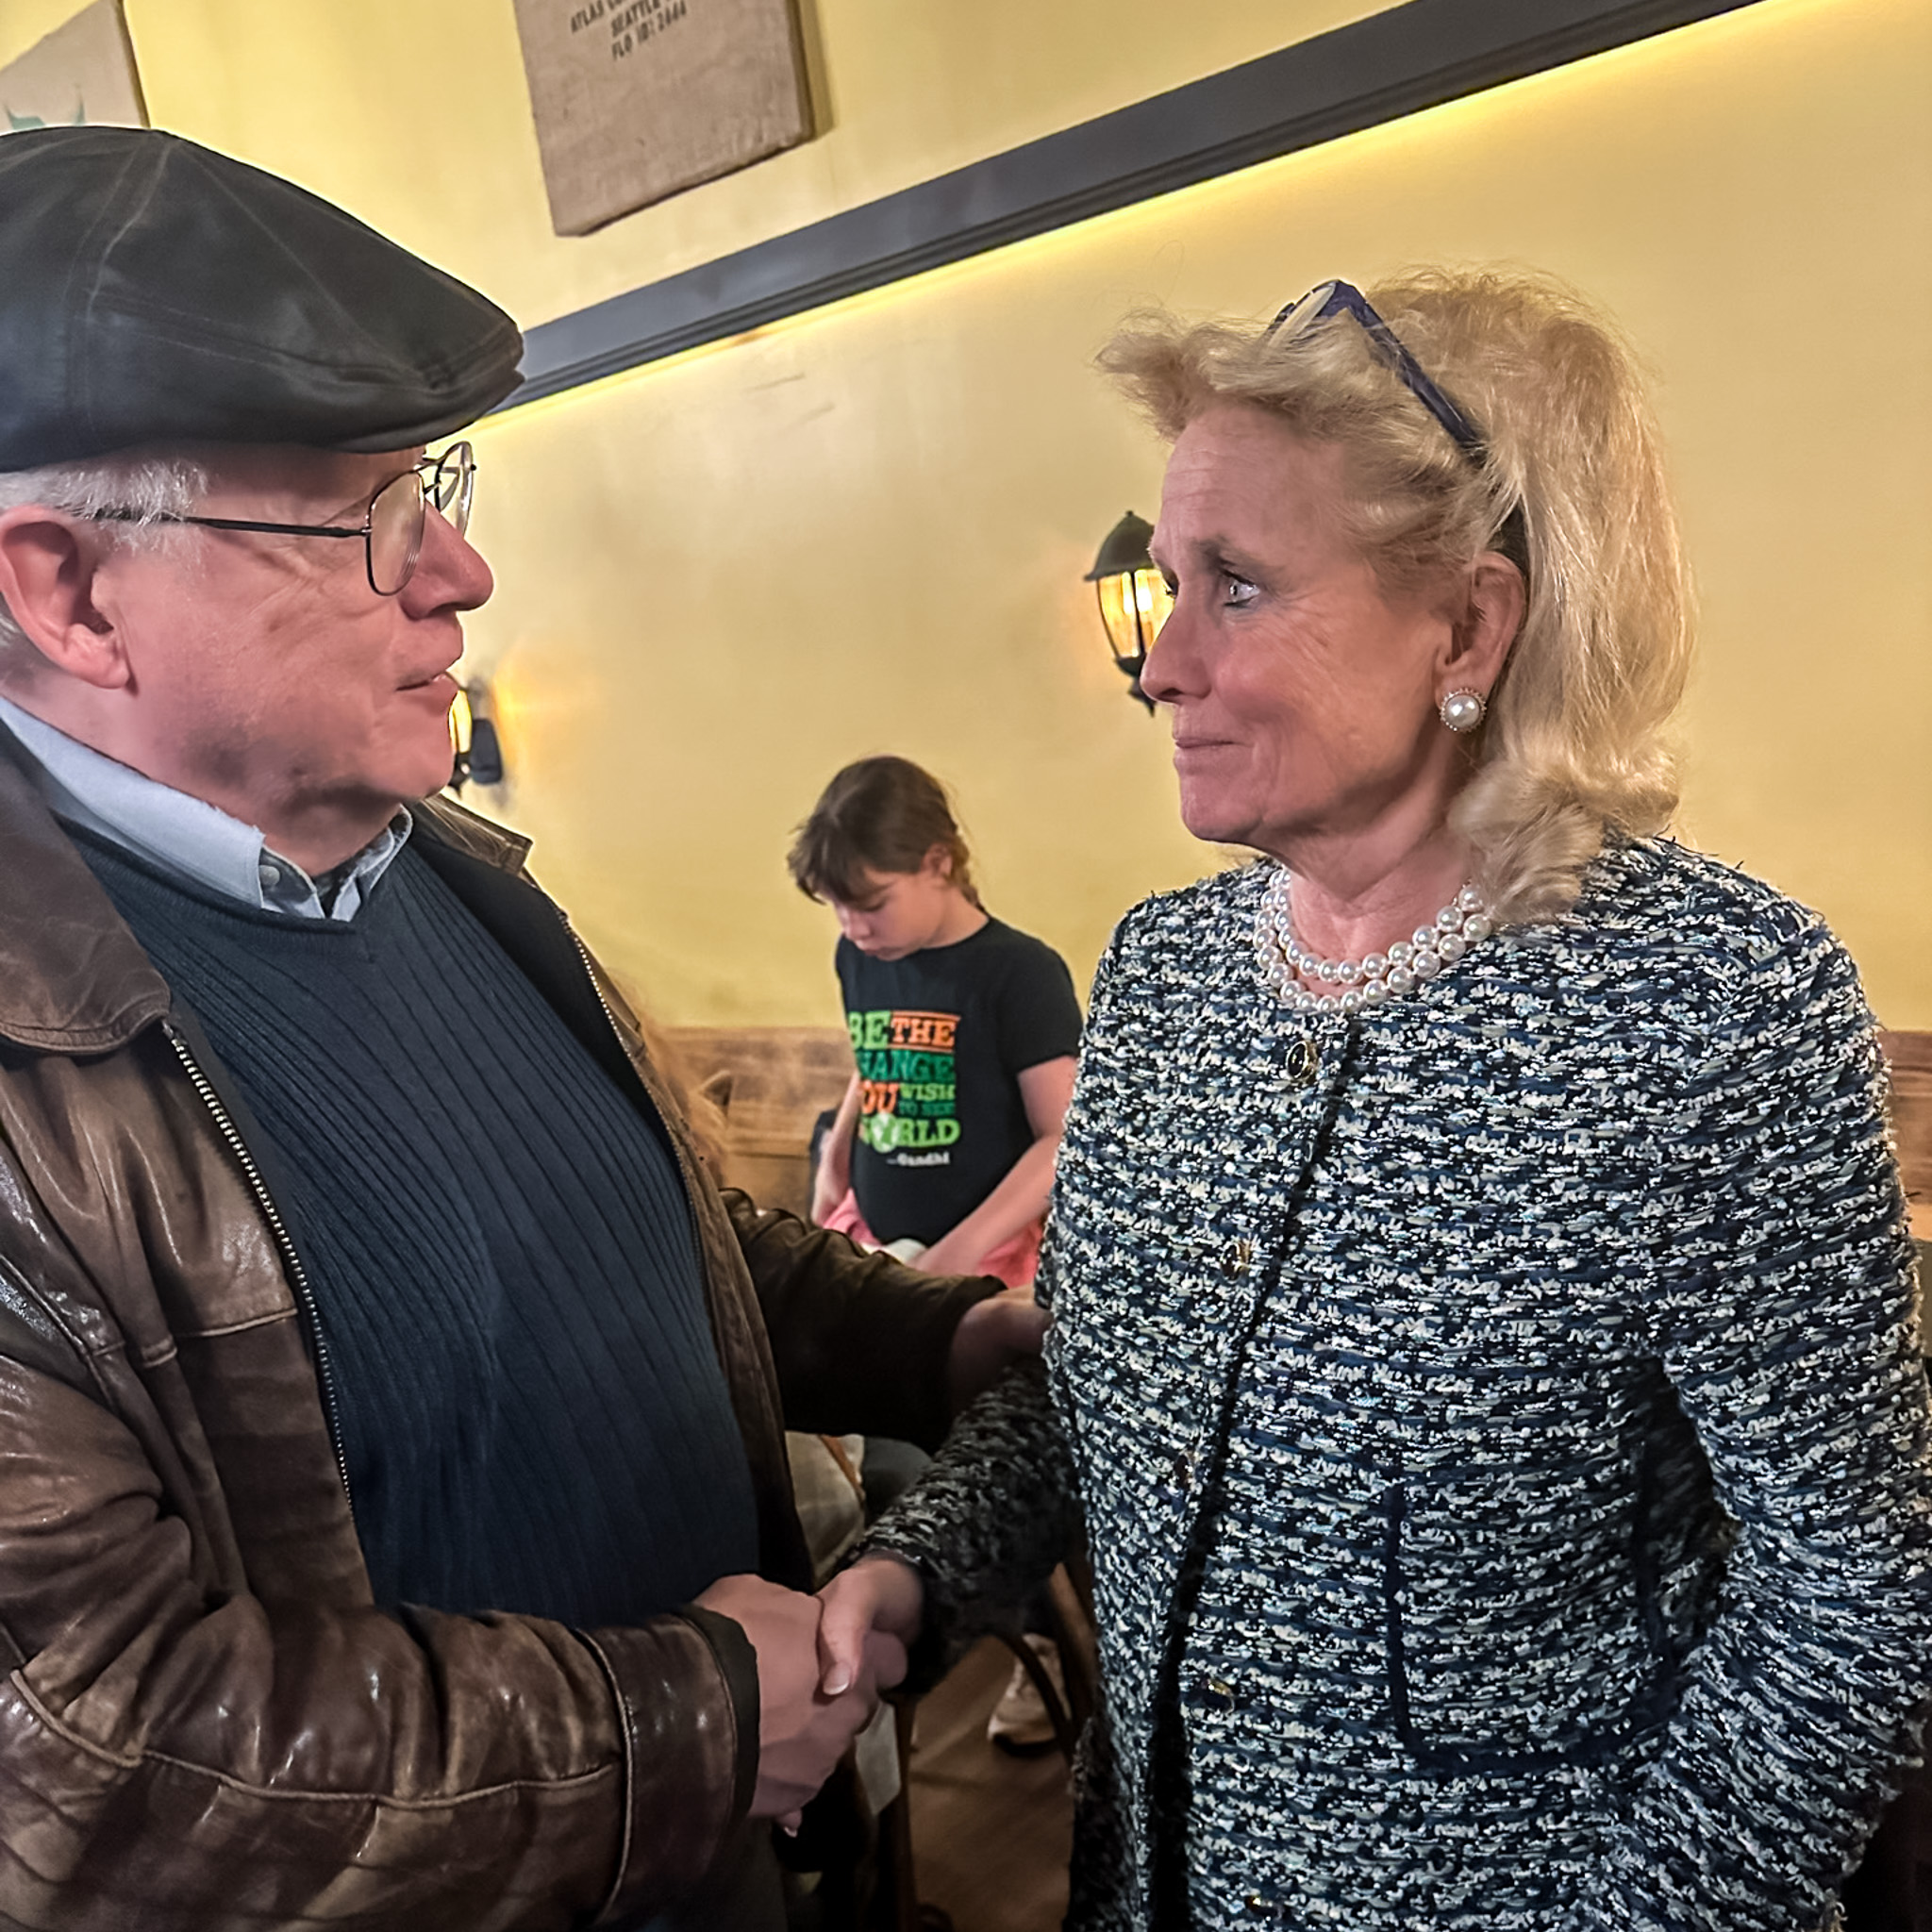 Rep. Dingell shakes hand with resident at town hall